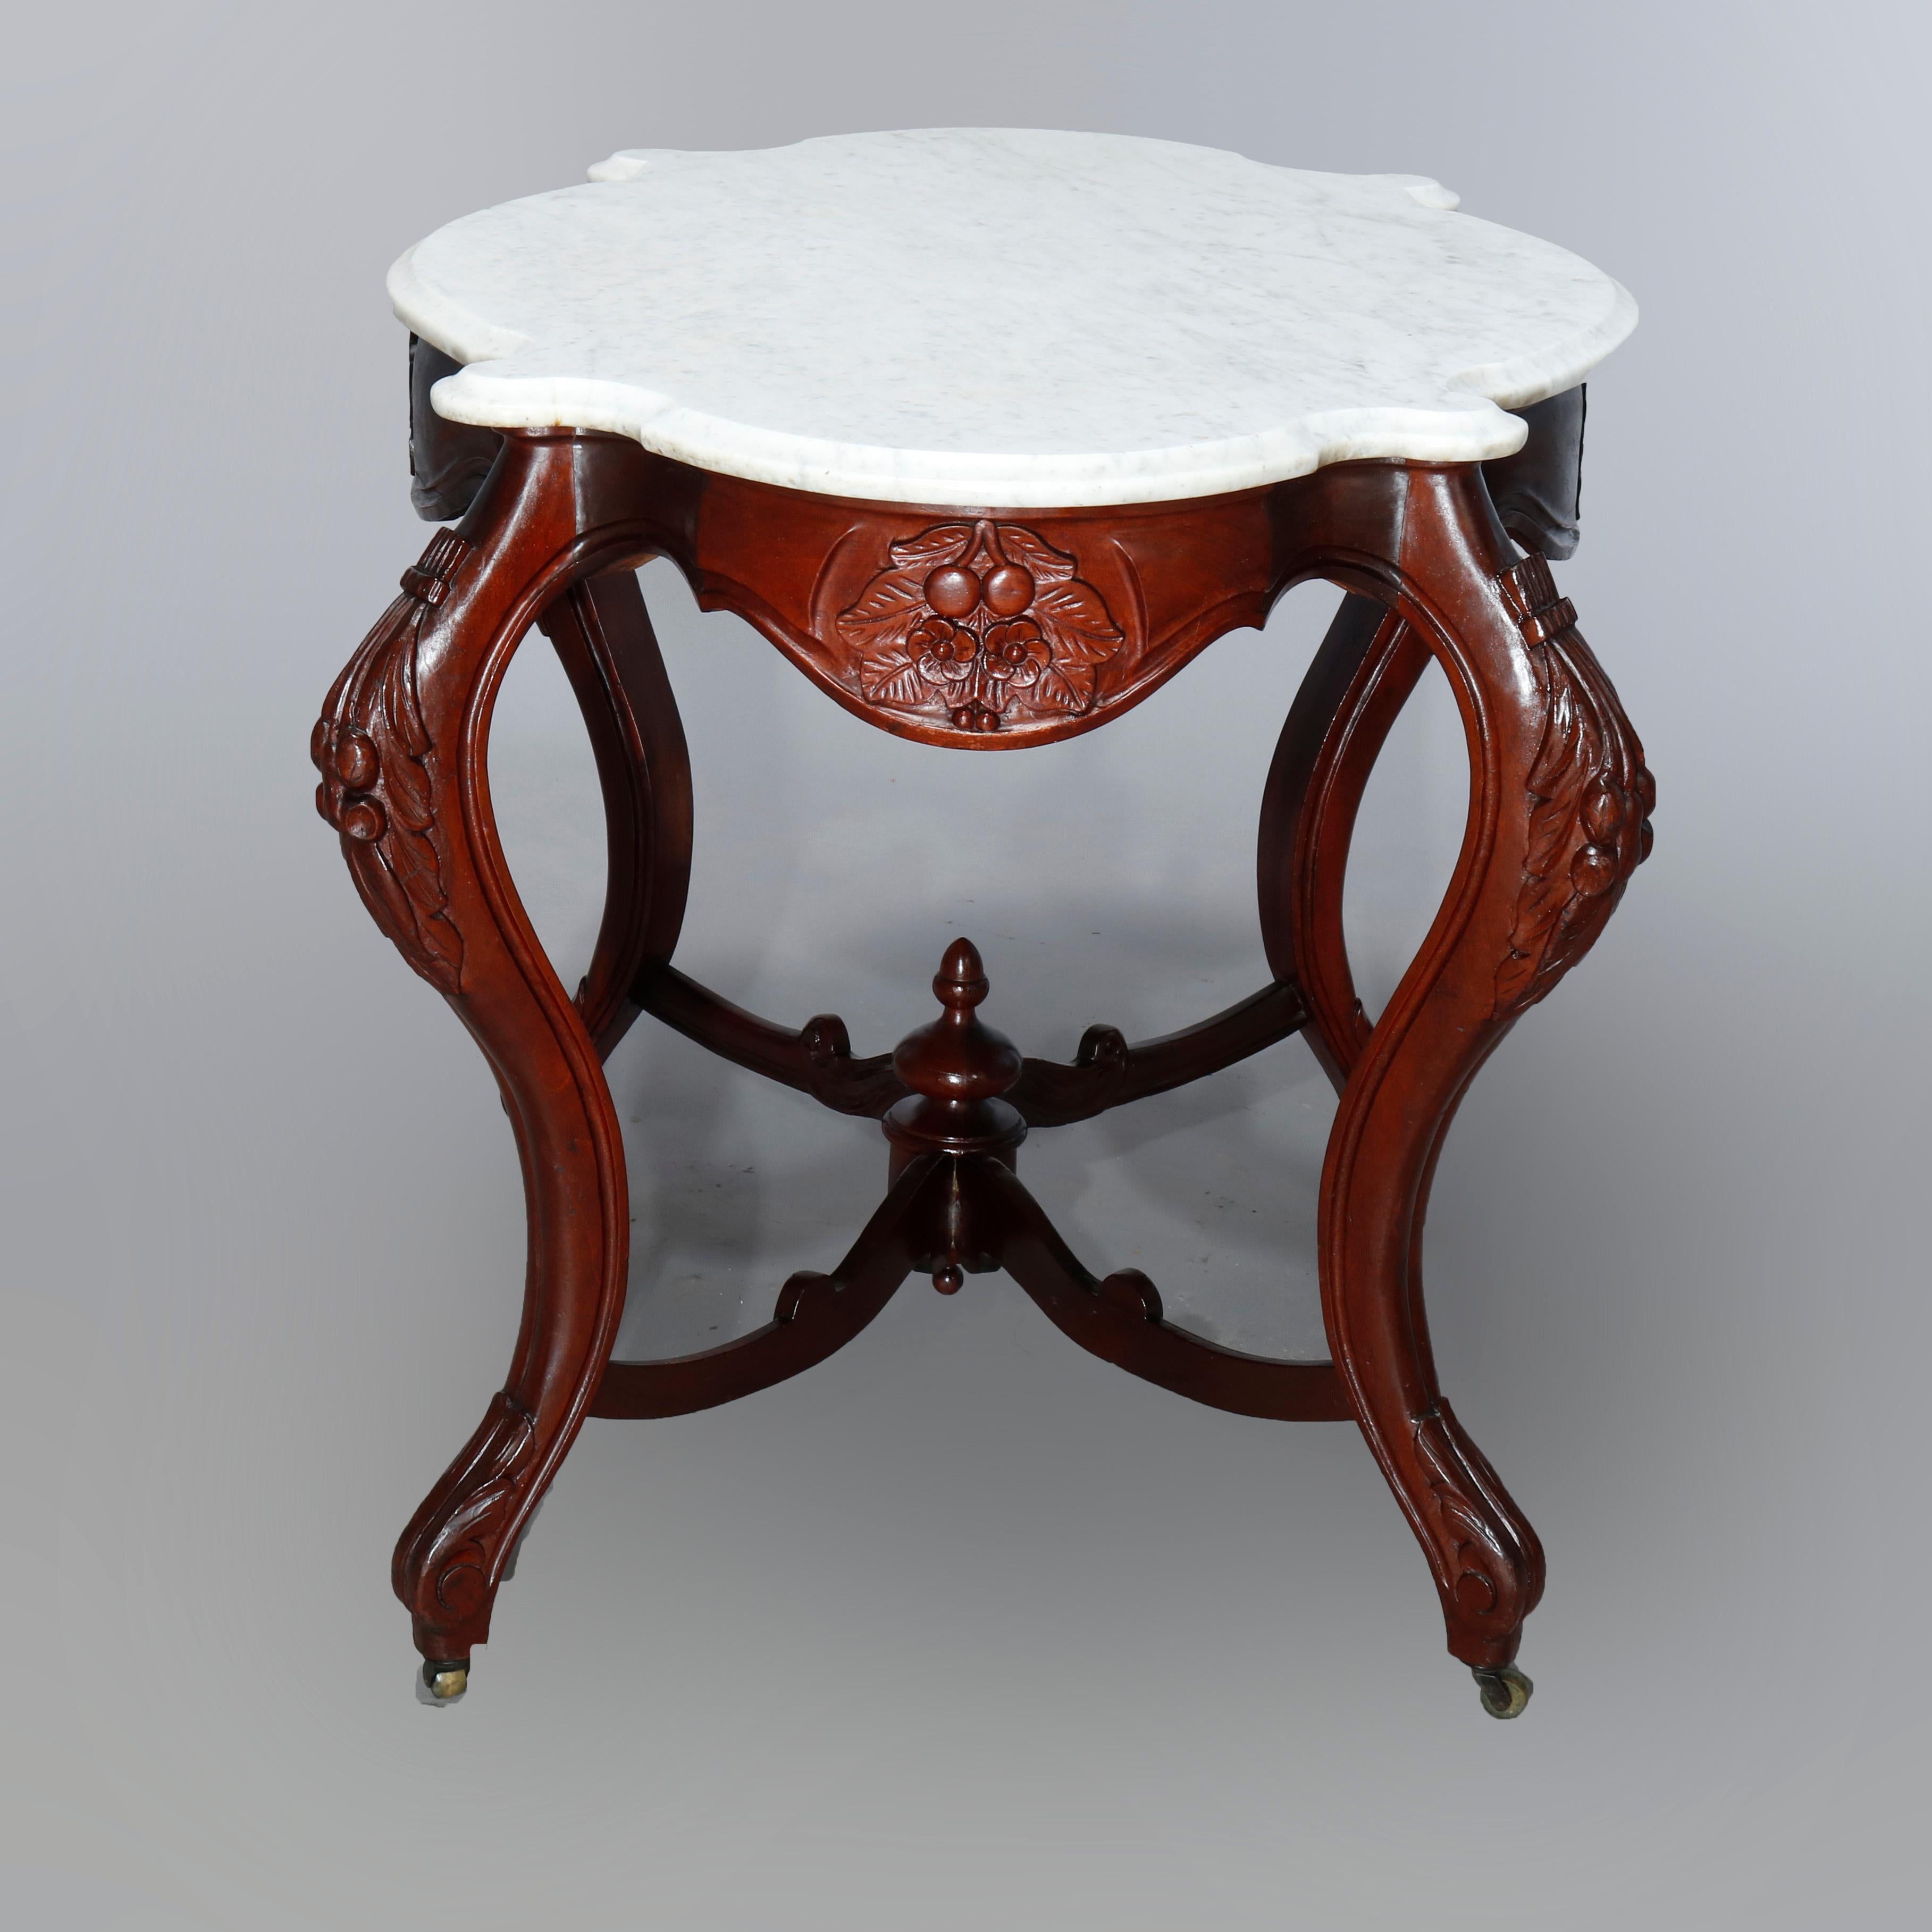 Antique Rococo Revival Turtle Top Carved Walnut & Marble Center Table, c1870 2